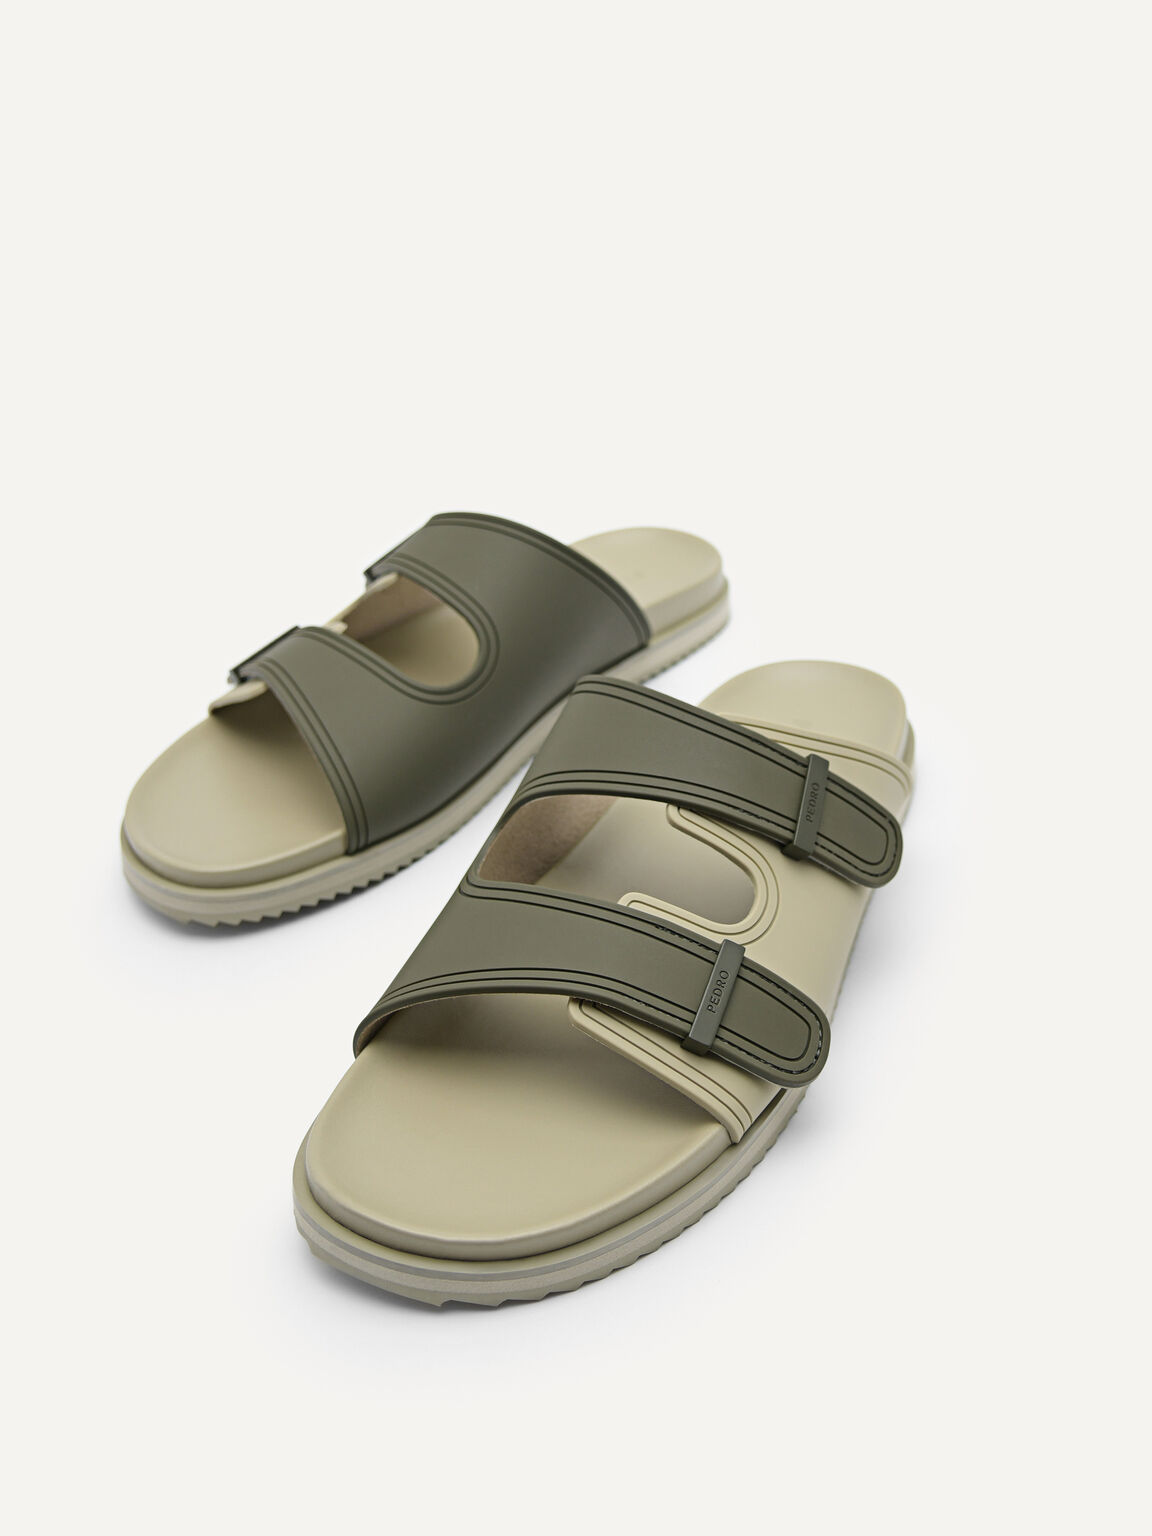 Rubber Double-strap Walking Sandals, Military Green, hi-res